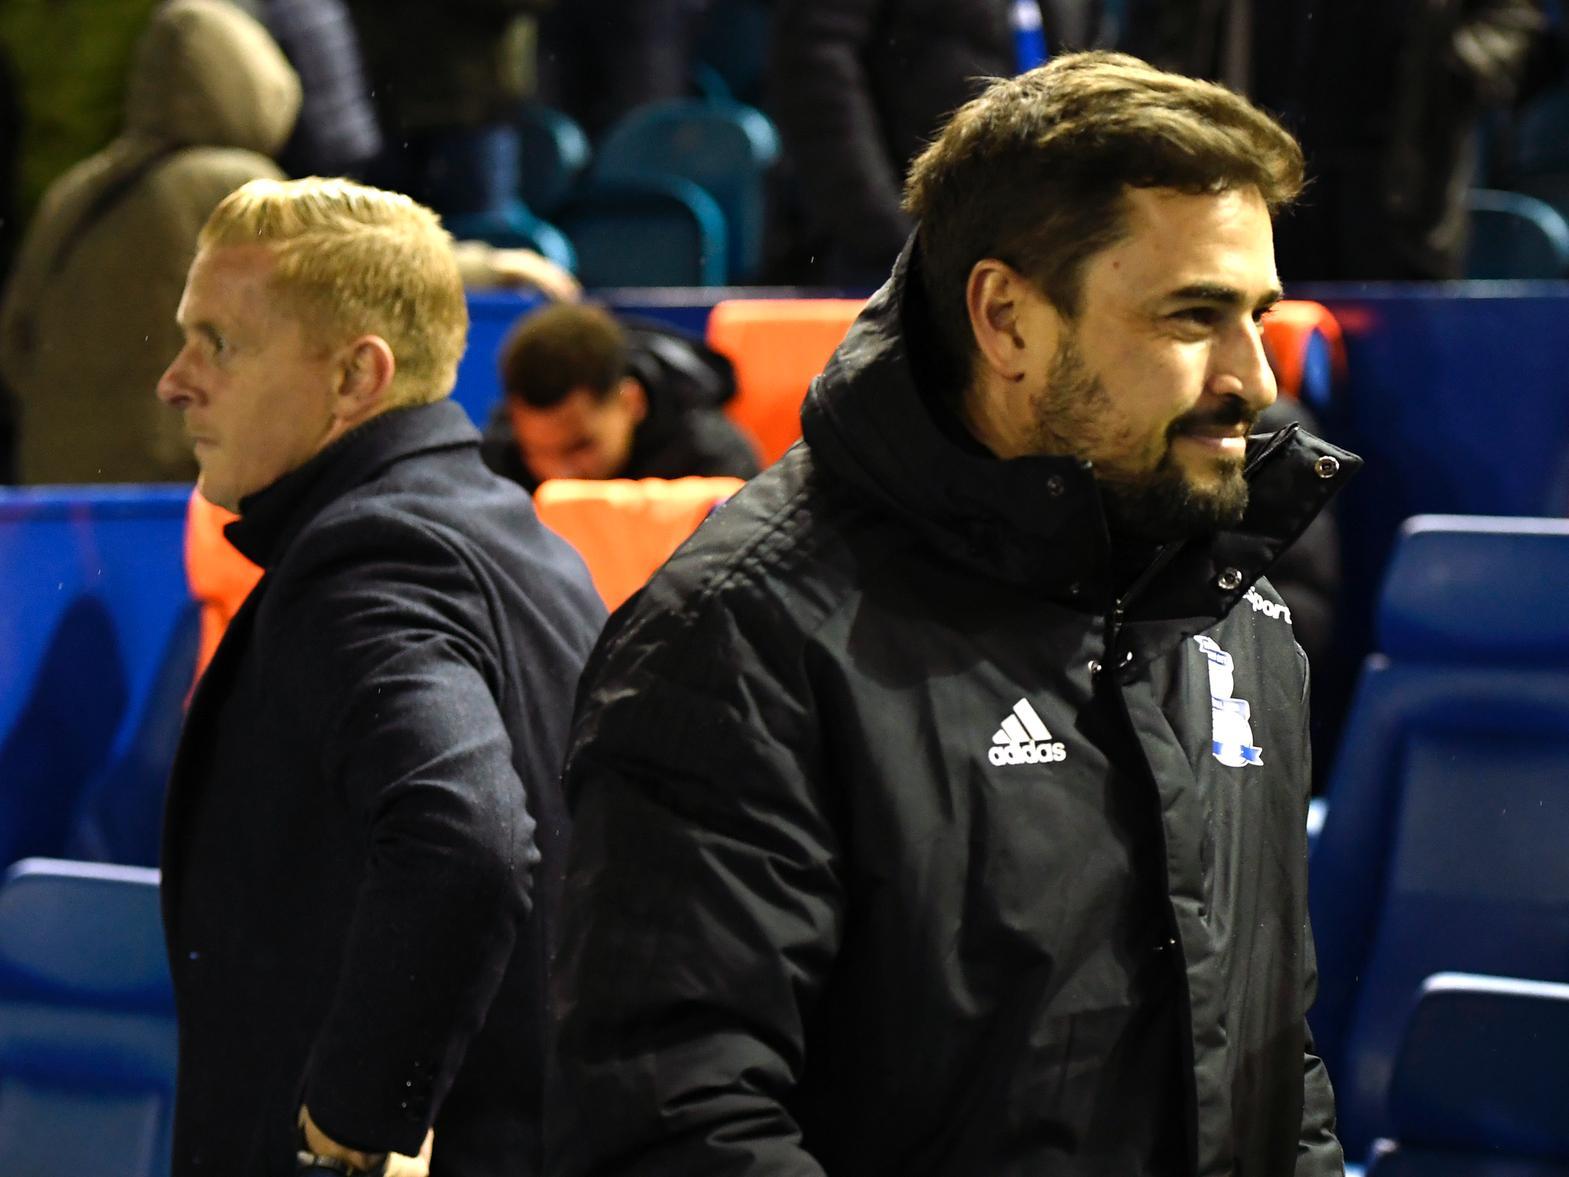 Birmingham City boss Pep Clotet has claimed that Garry Monk made him leave Leeds United against his will during their time at Elland Road, in the latest exchange between the two former colleagues. (Birmingham Mail)